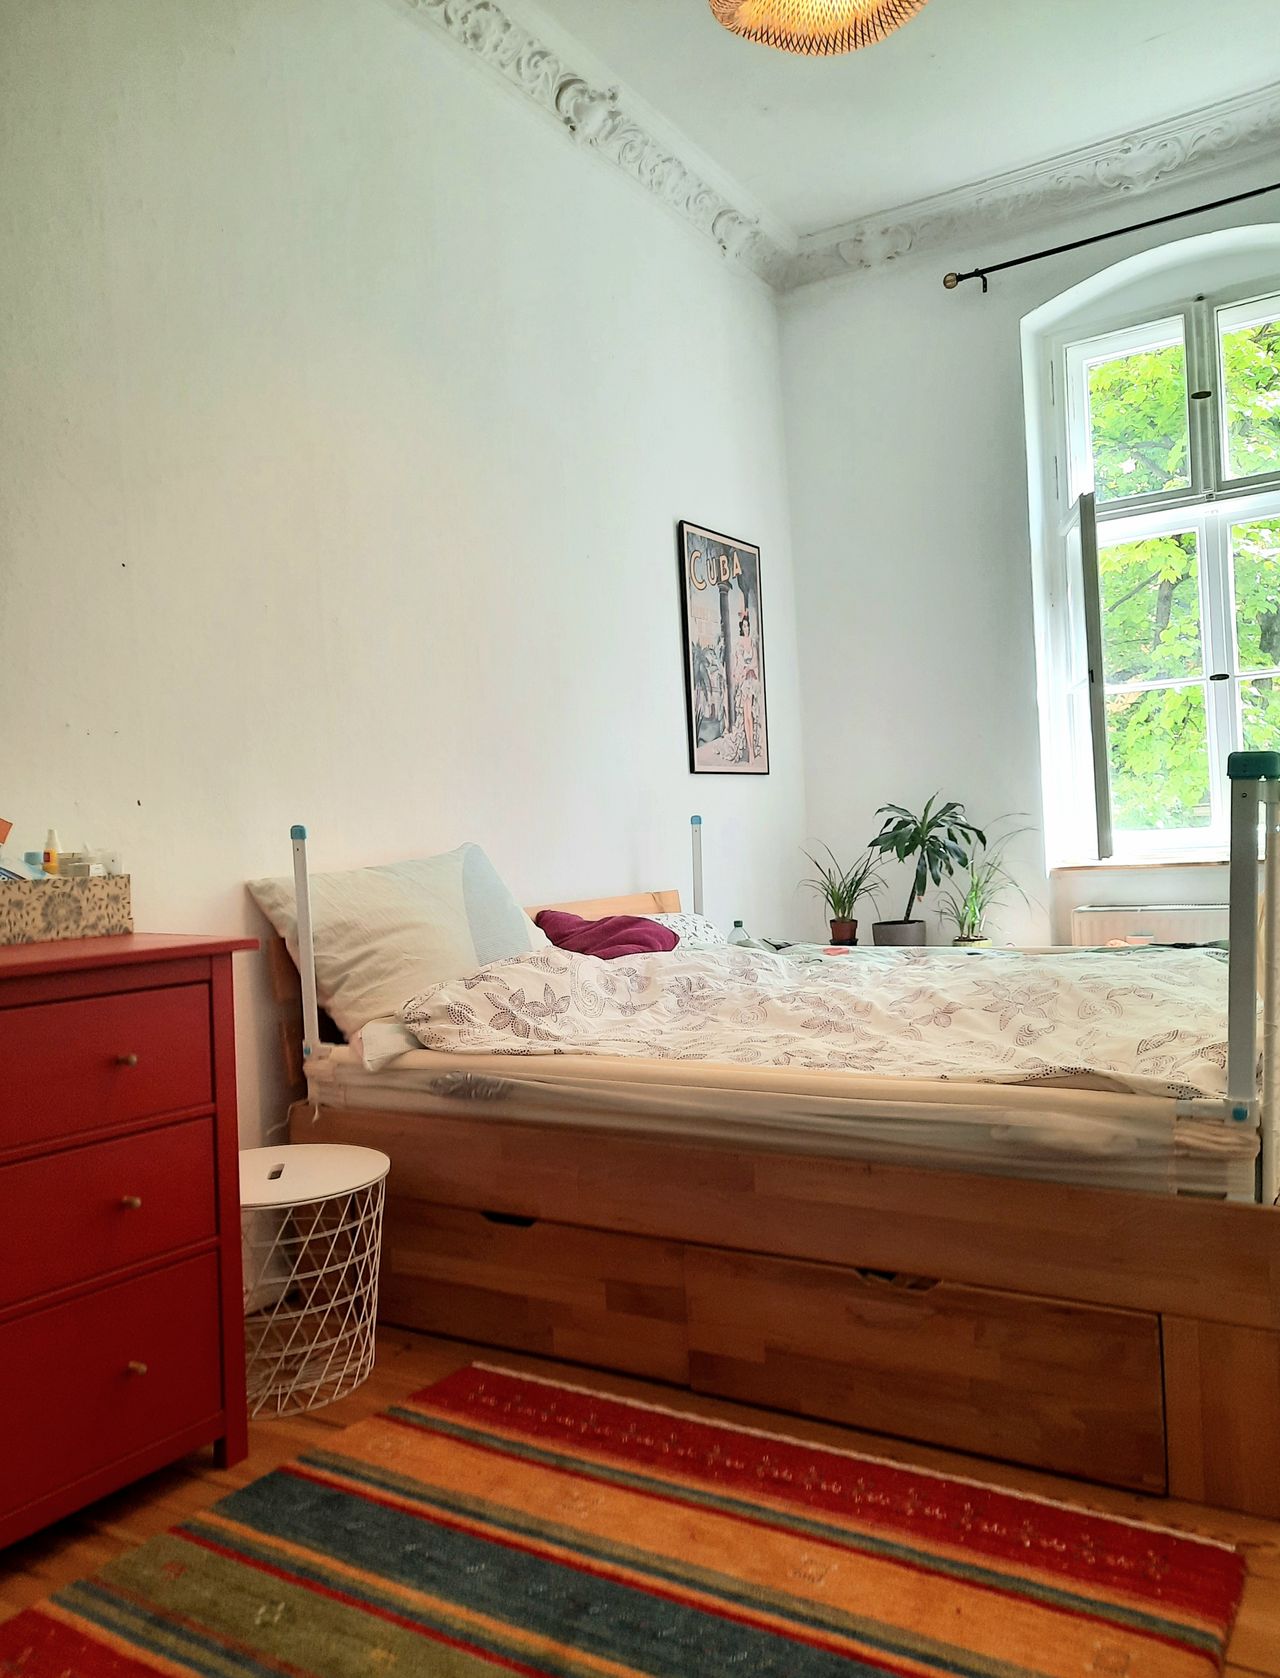 For February: Nice historical flat in the center of Berlin